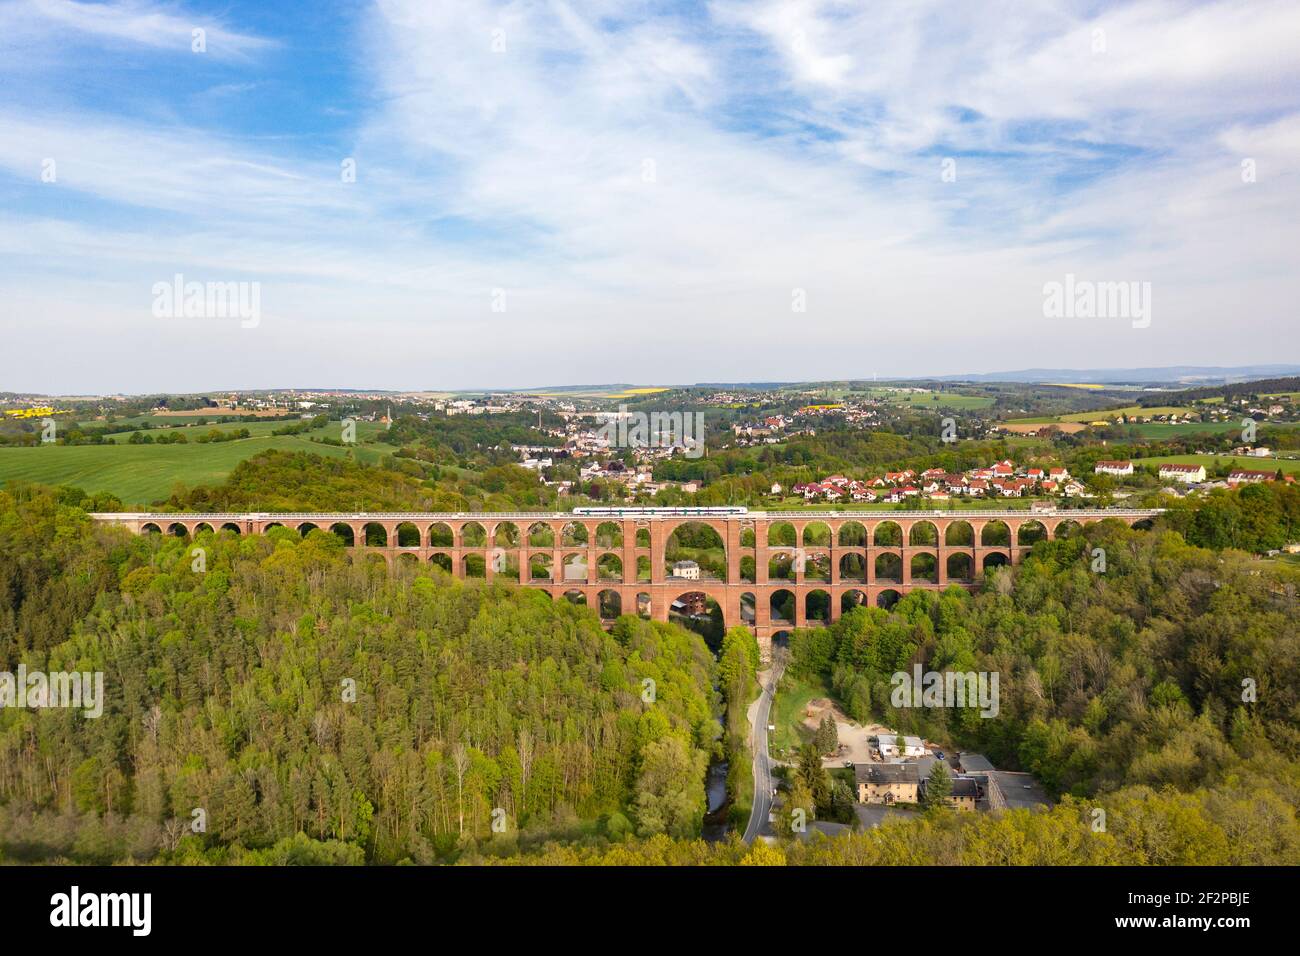 Largest brick arch bridge in the world (574 m long, 78 m high) Train, houses, valley, forest Stock Photo